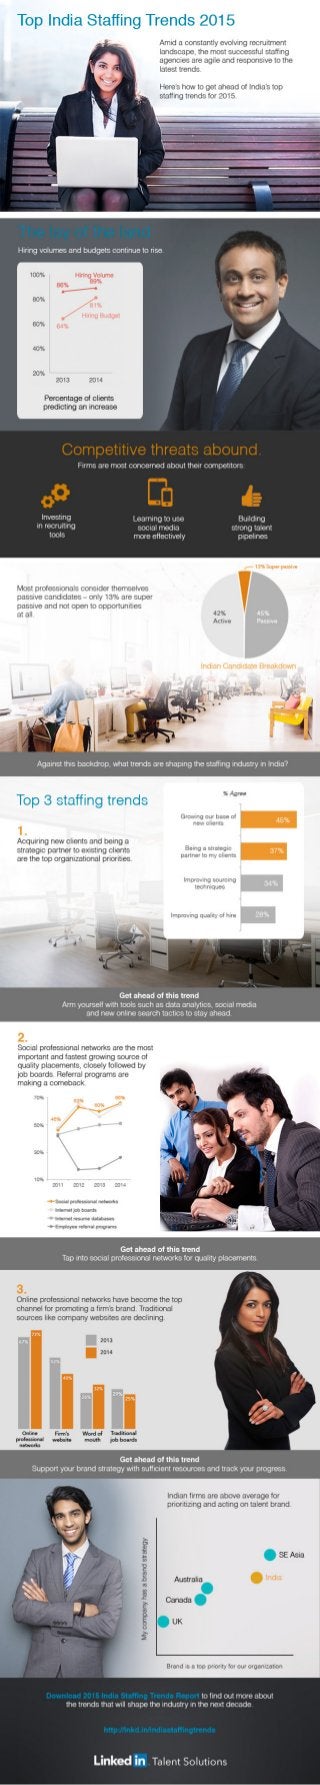 Top India Staffing Trends 2015 | Infographic